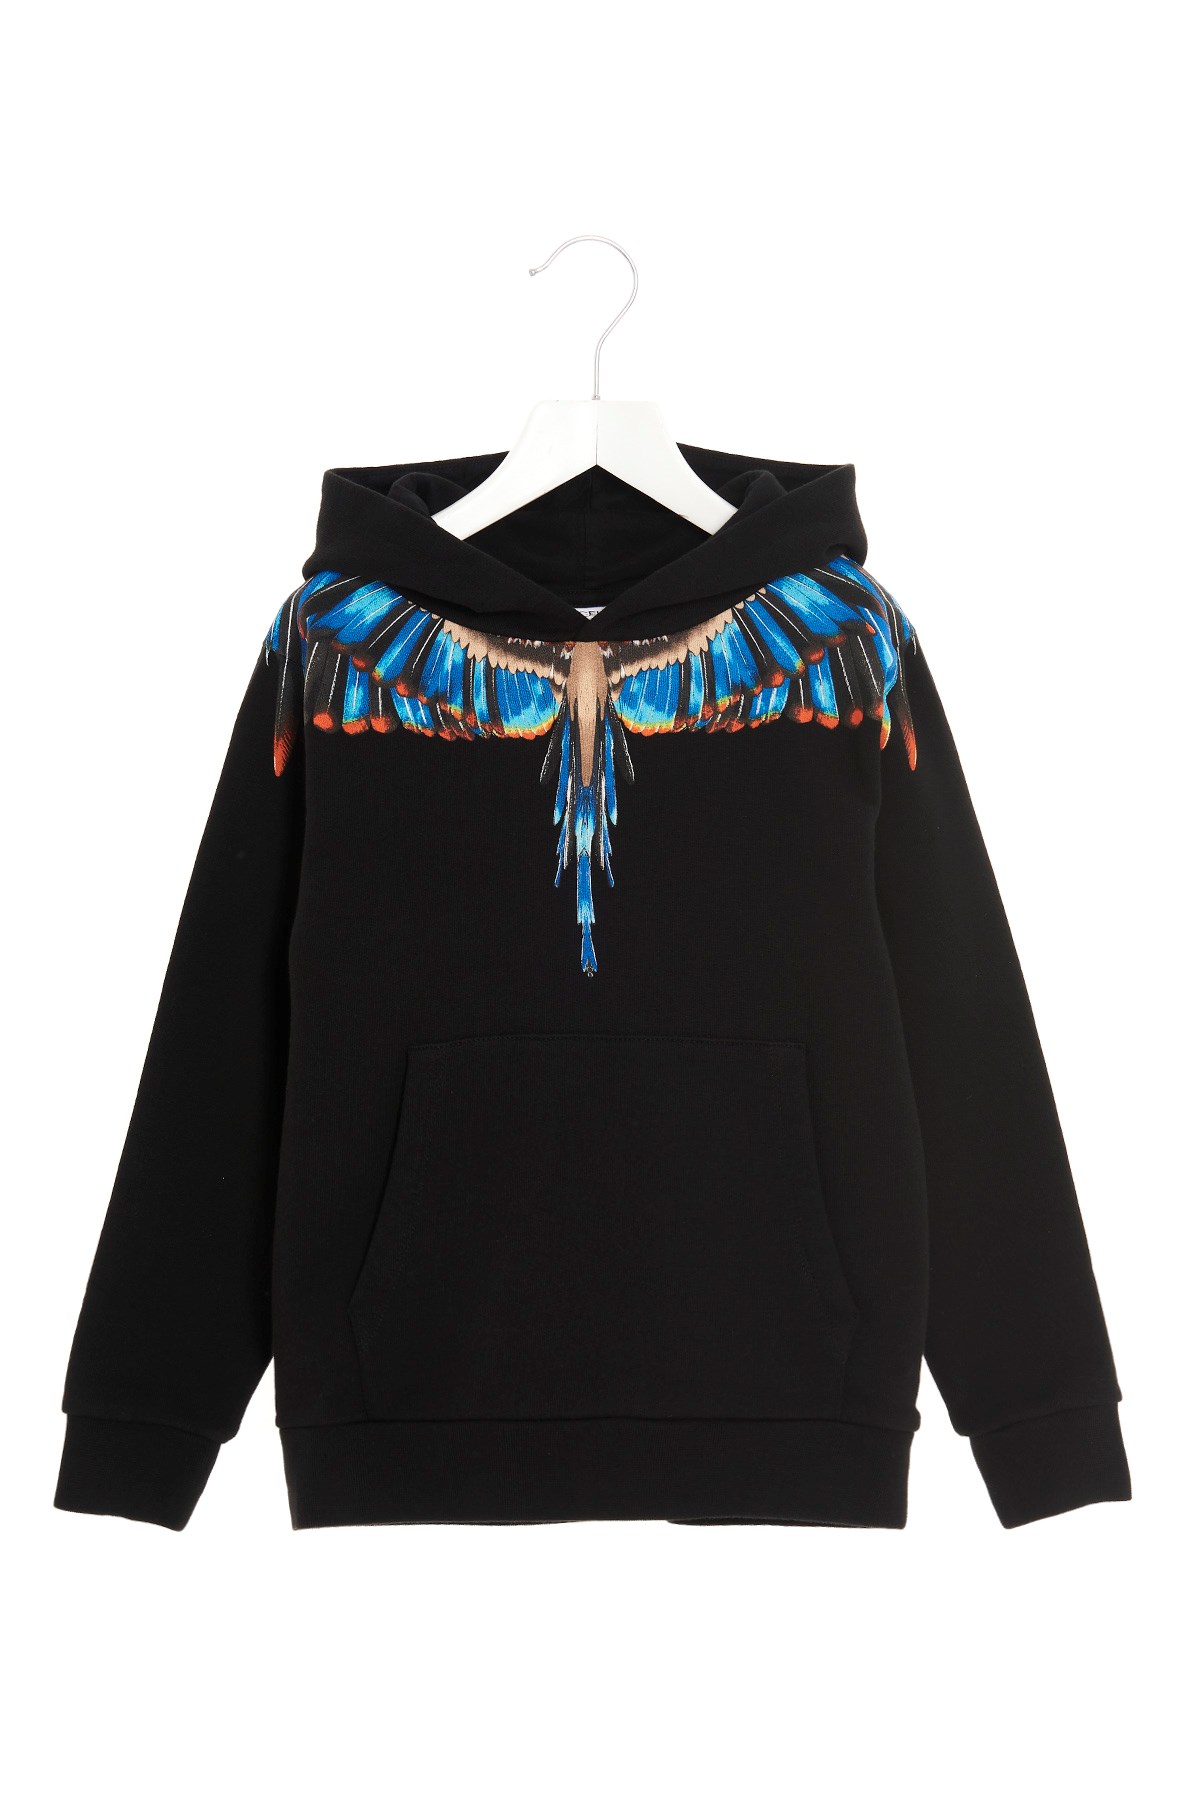 MARCELO BURLON - COUNTY OF MILAN 'Blue Grizzly Wings' Hoodie